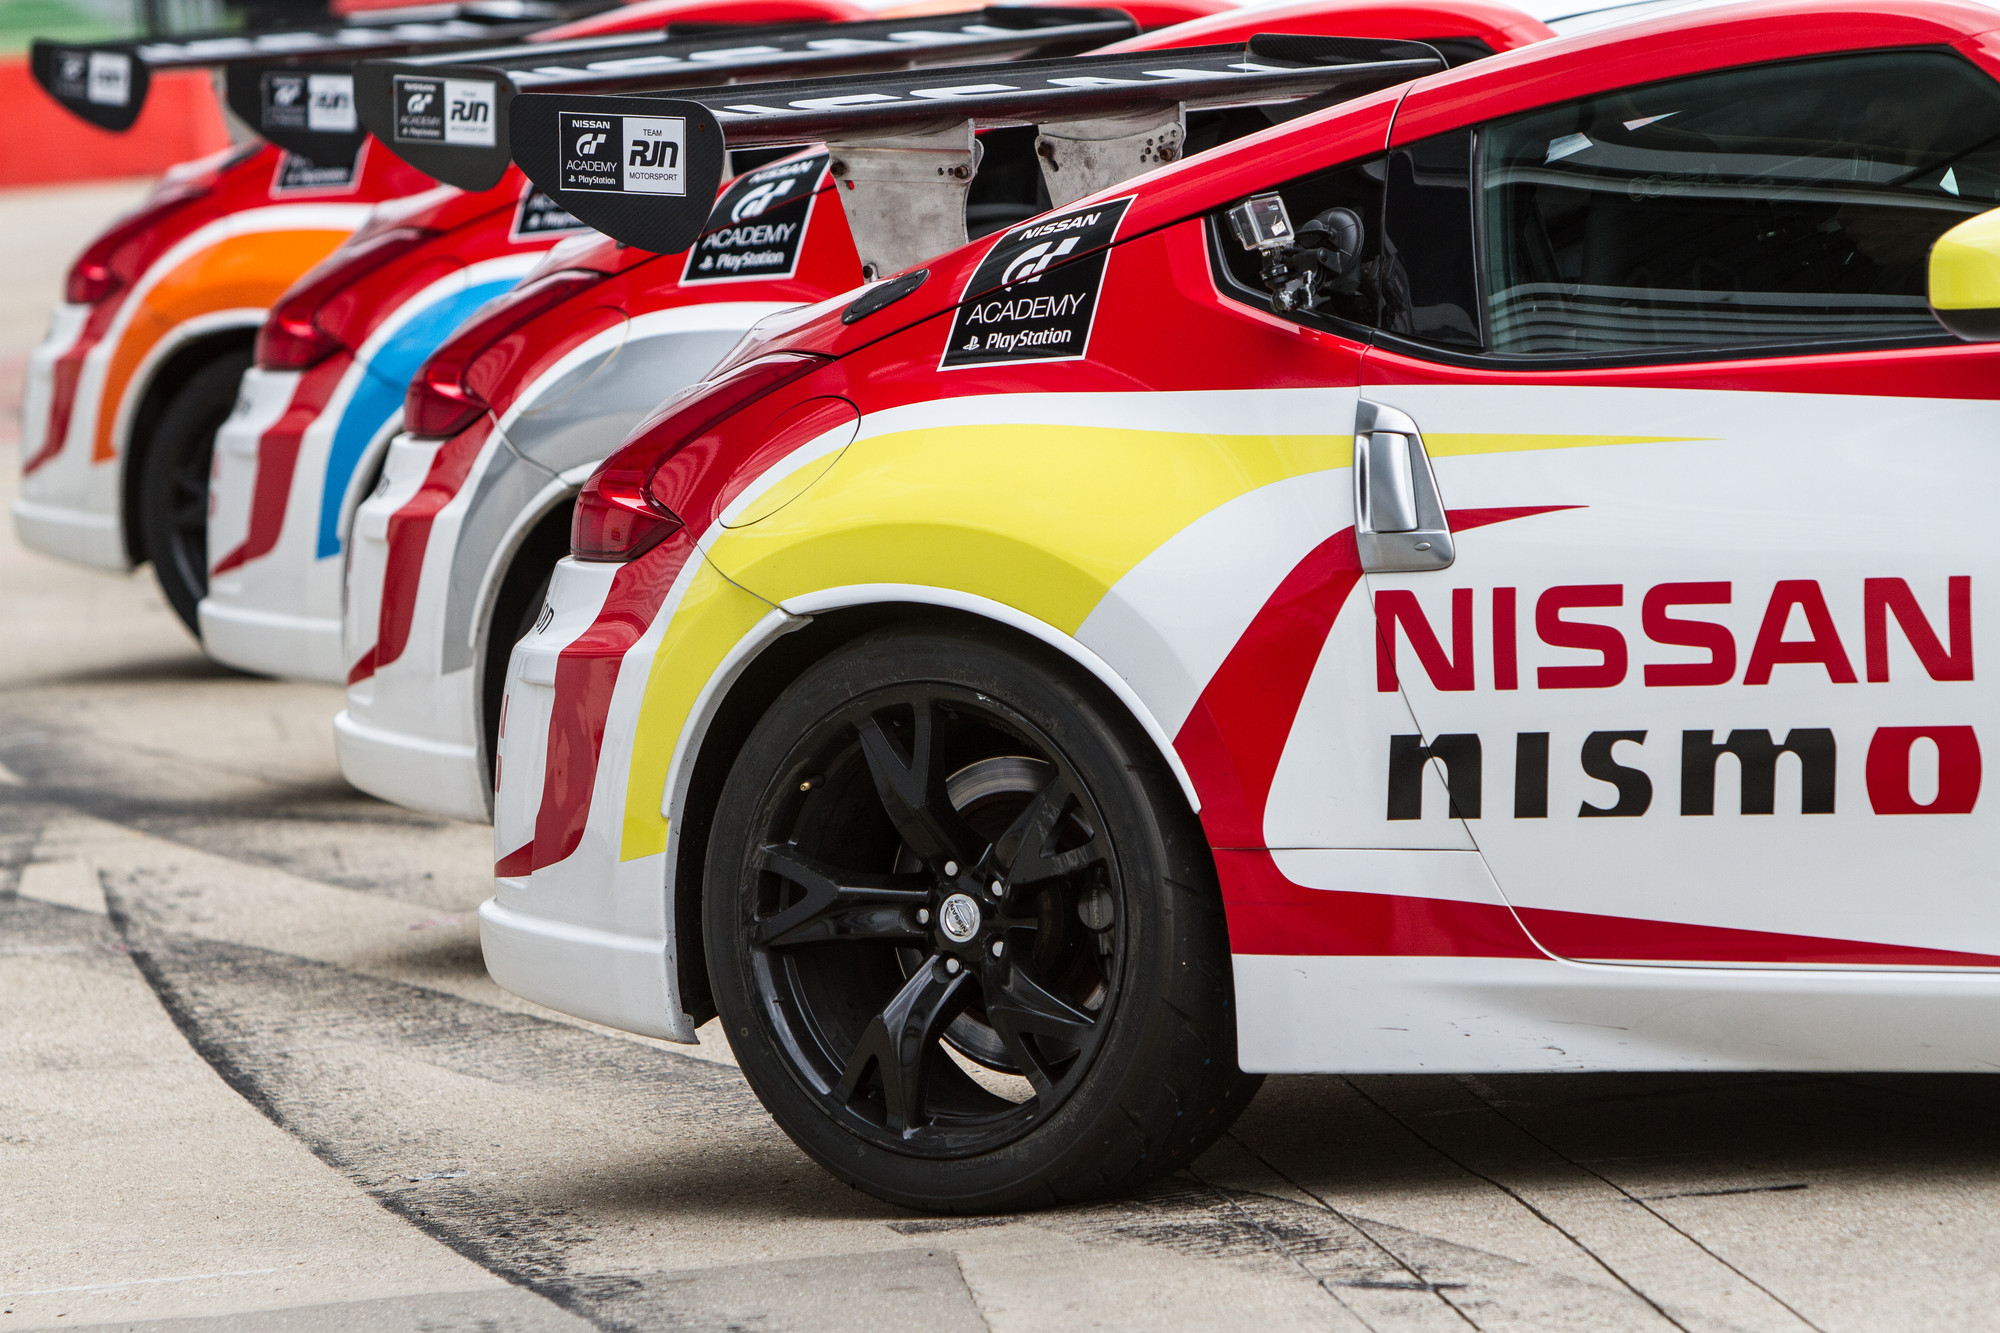 Nissan scouting racing drivers in India for GT Academy